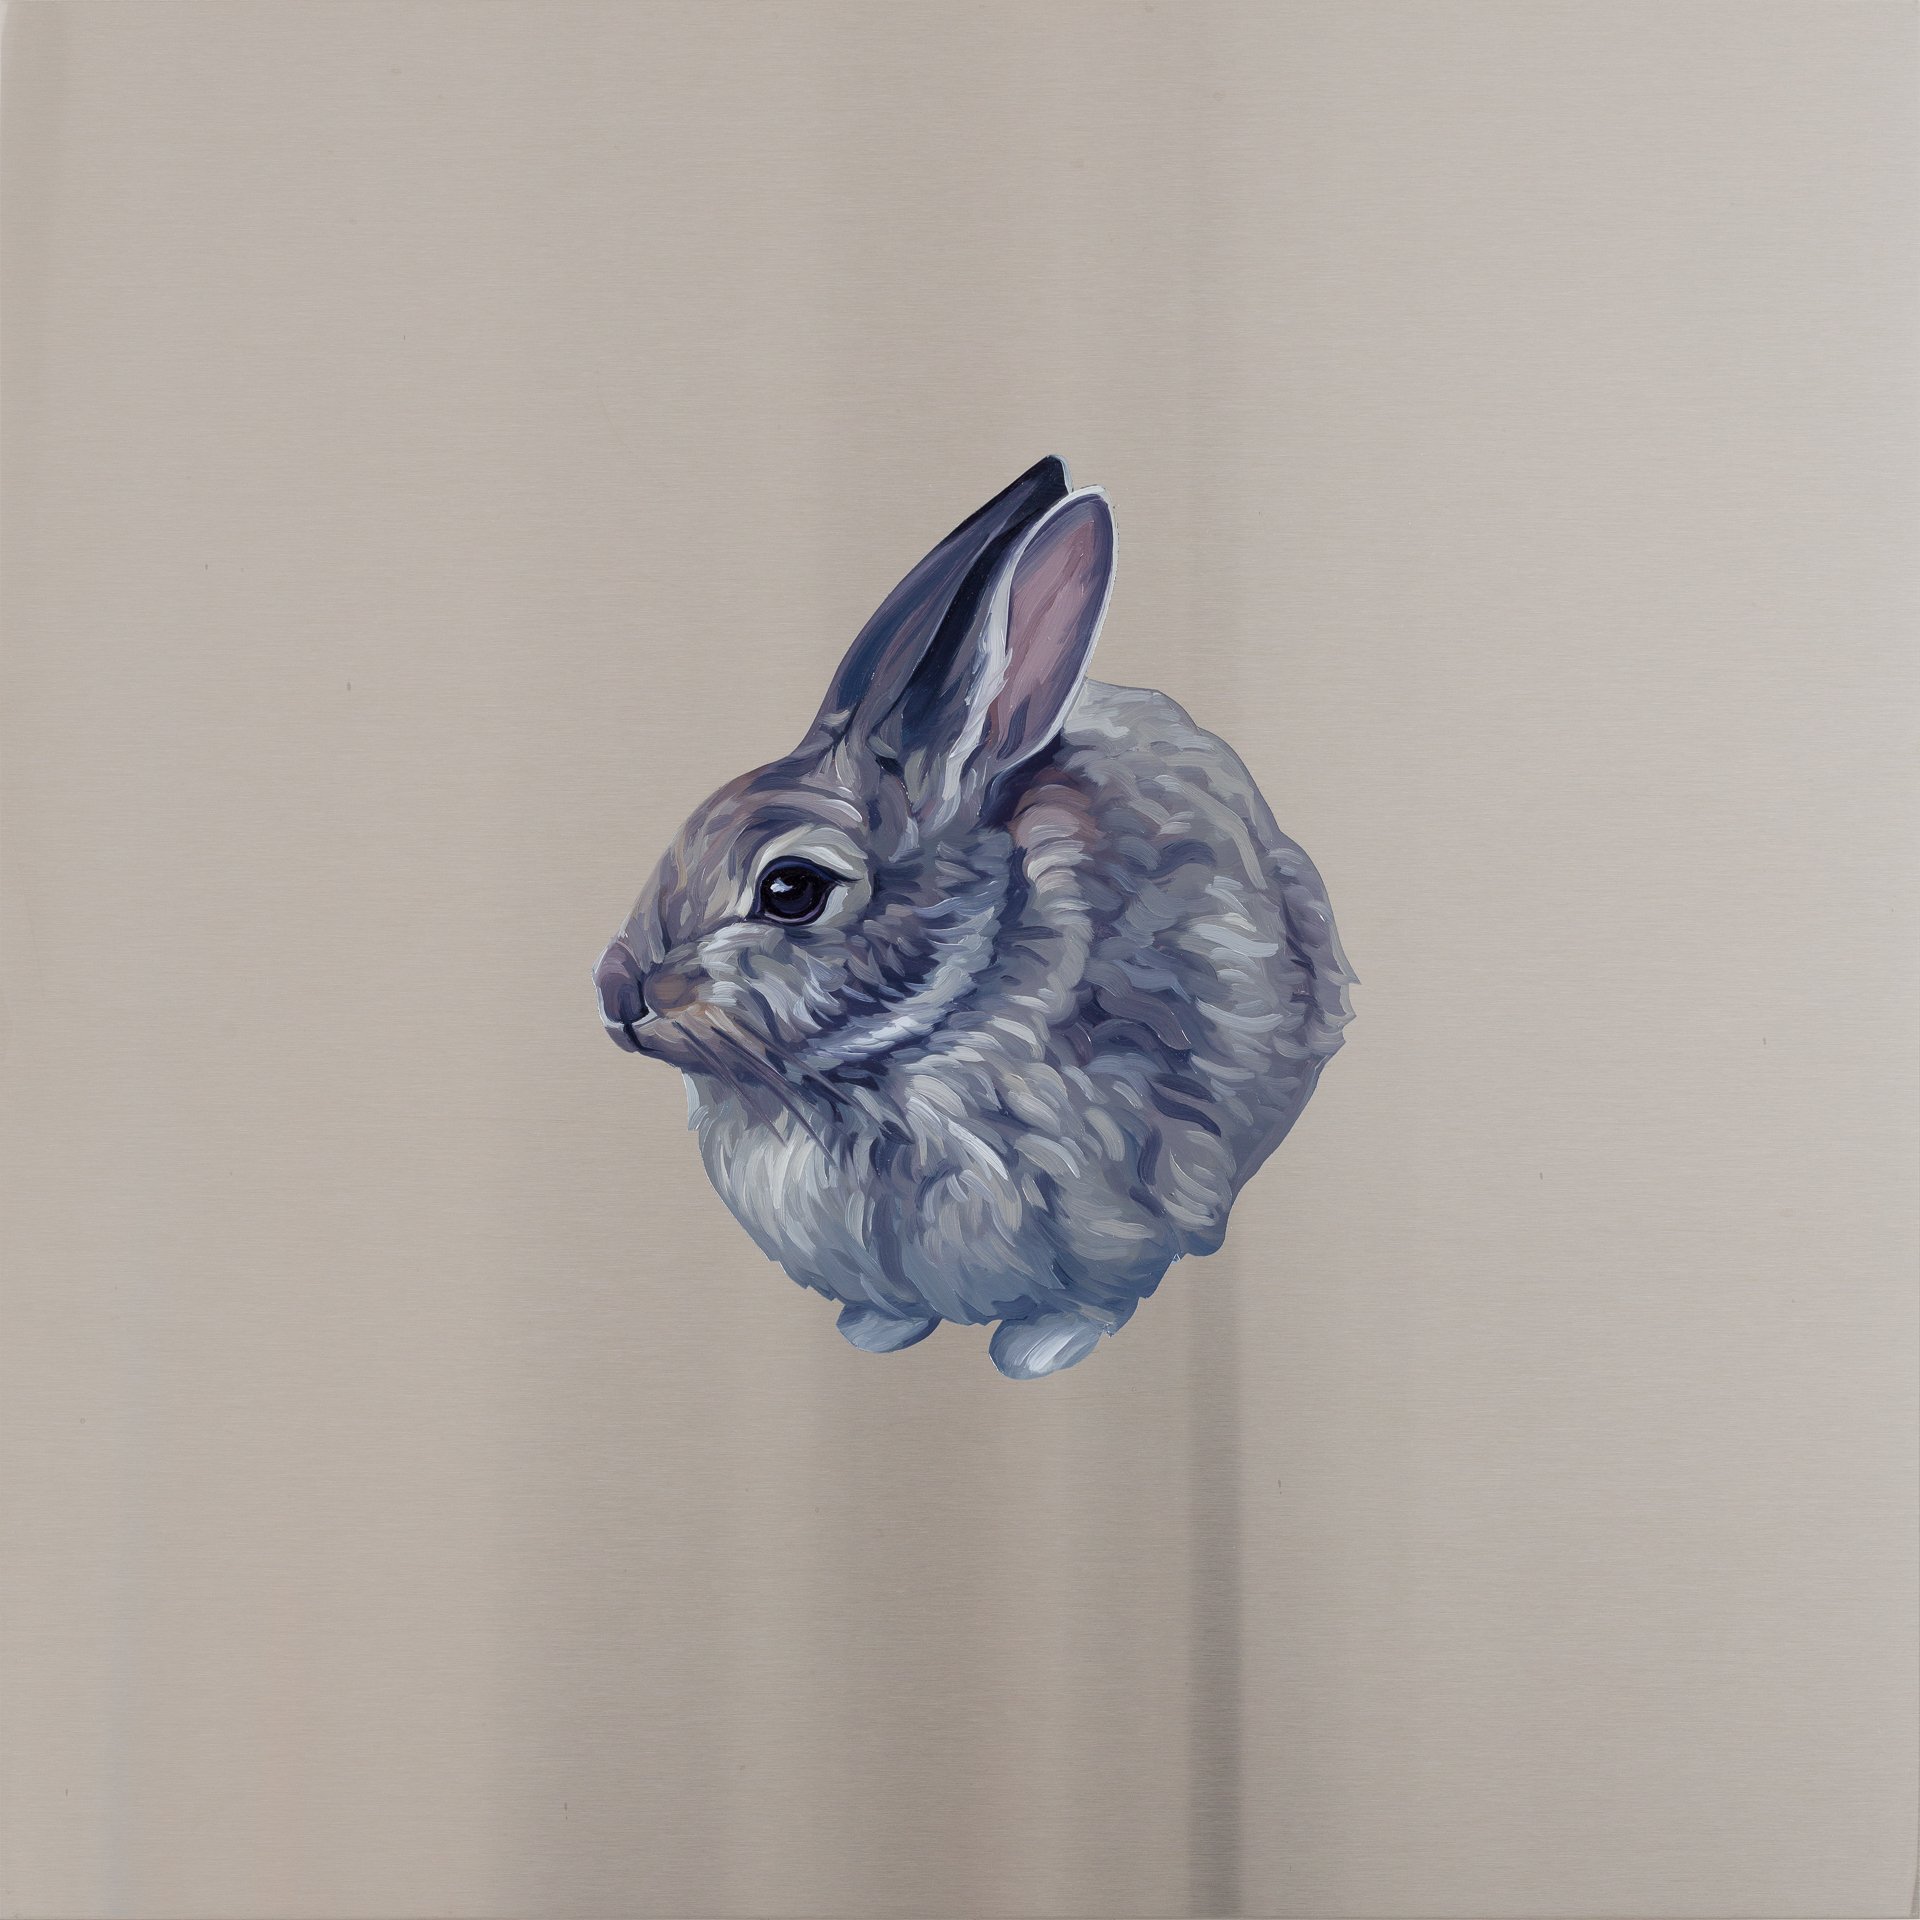  Cottontail Rabbit. Oil on stainless steel, 18in x 18in 